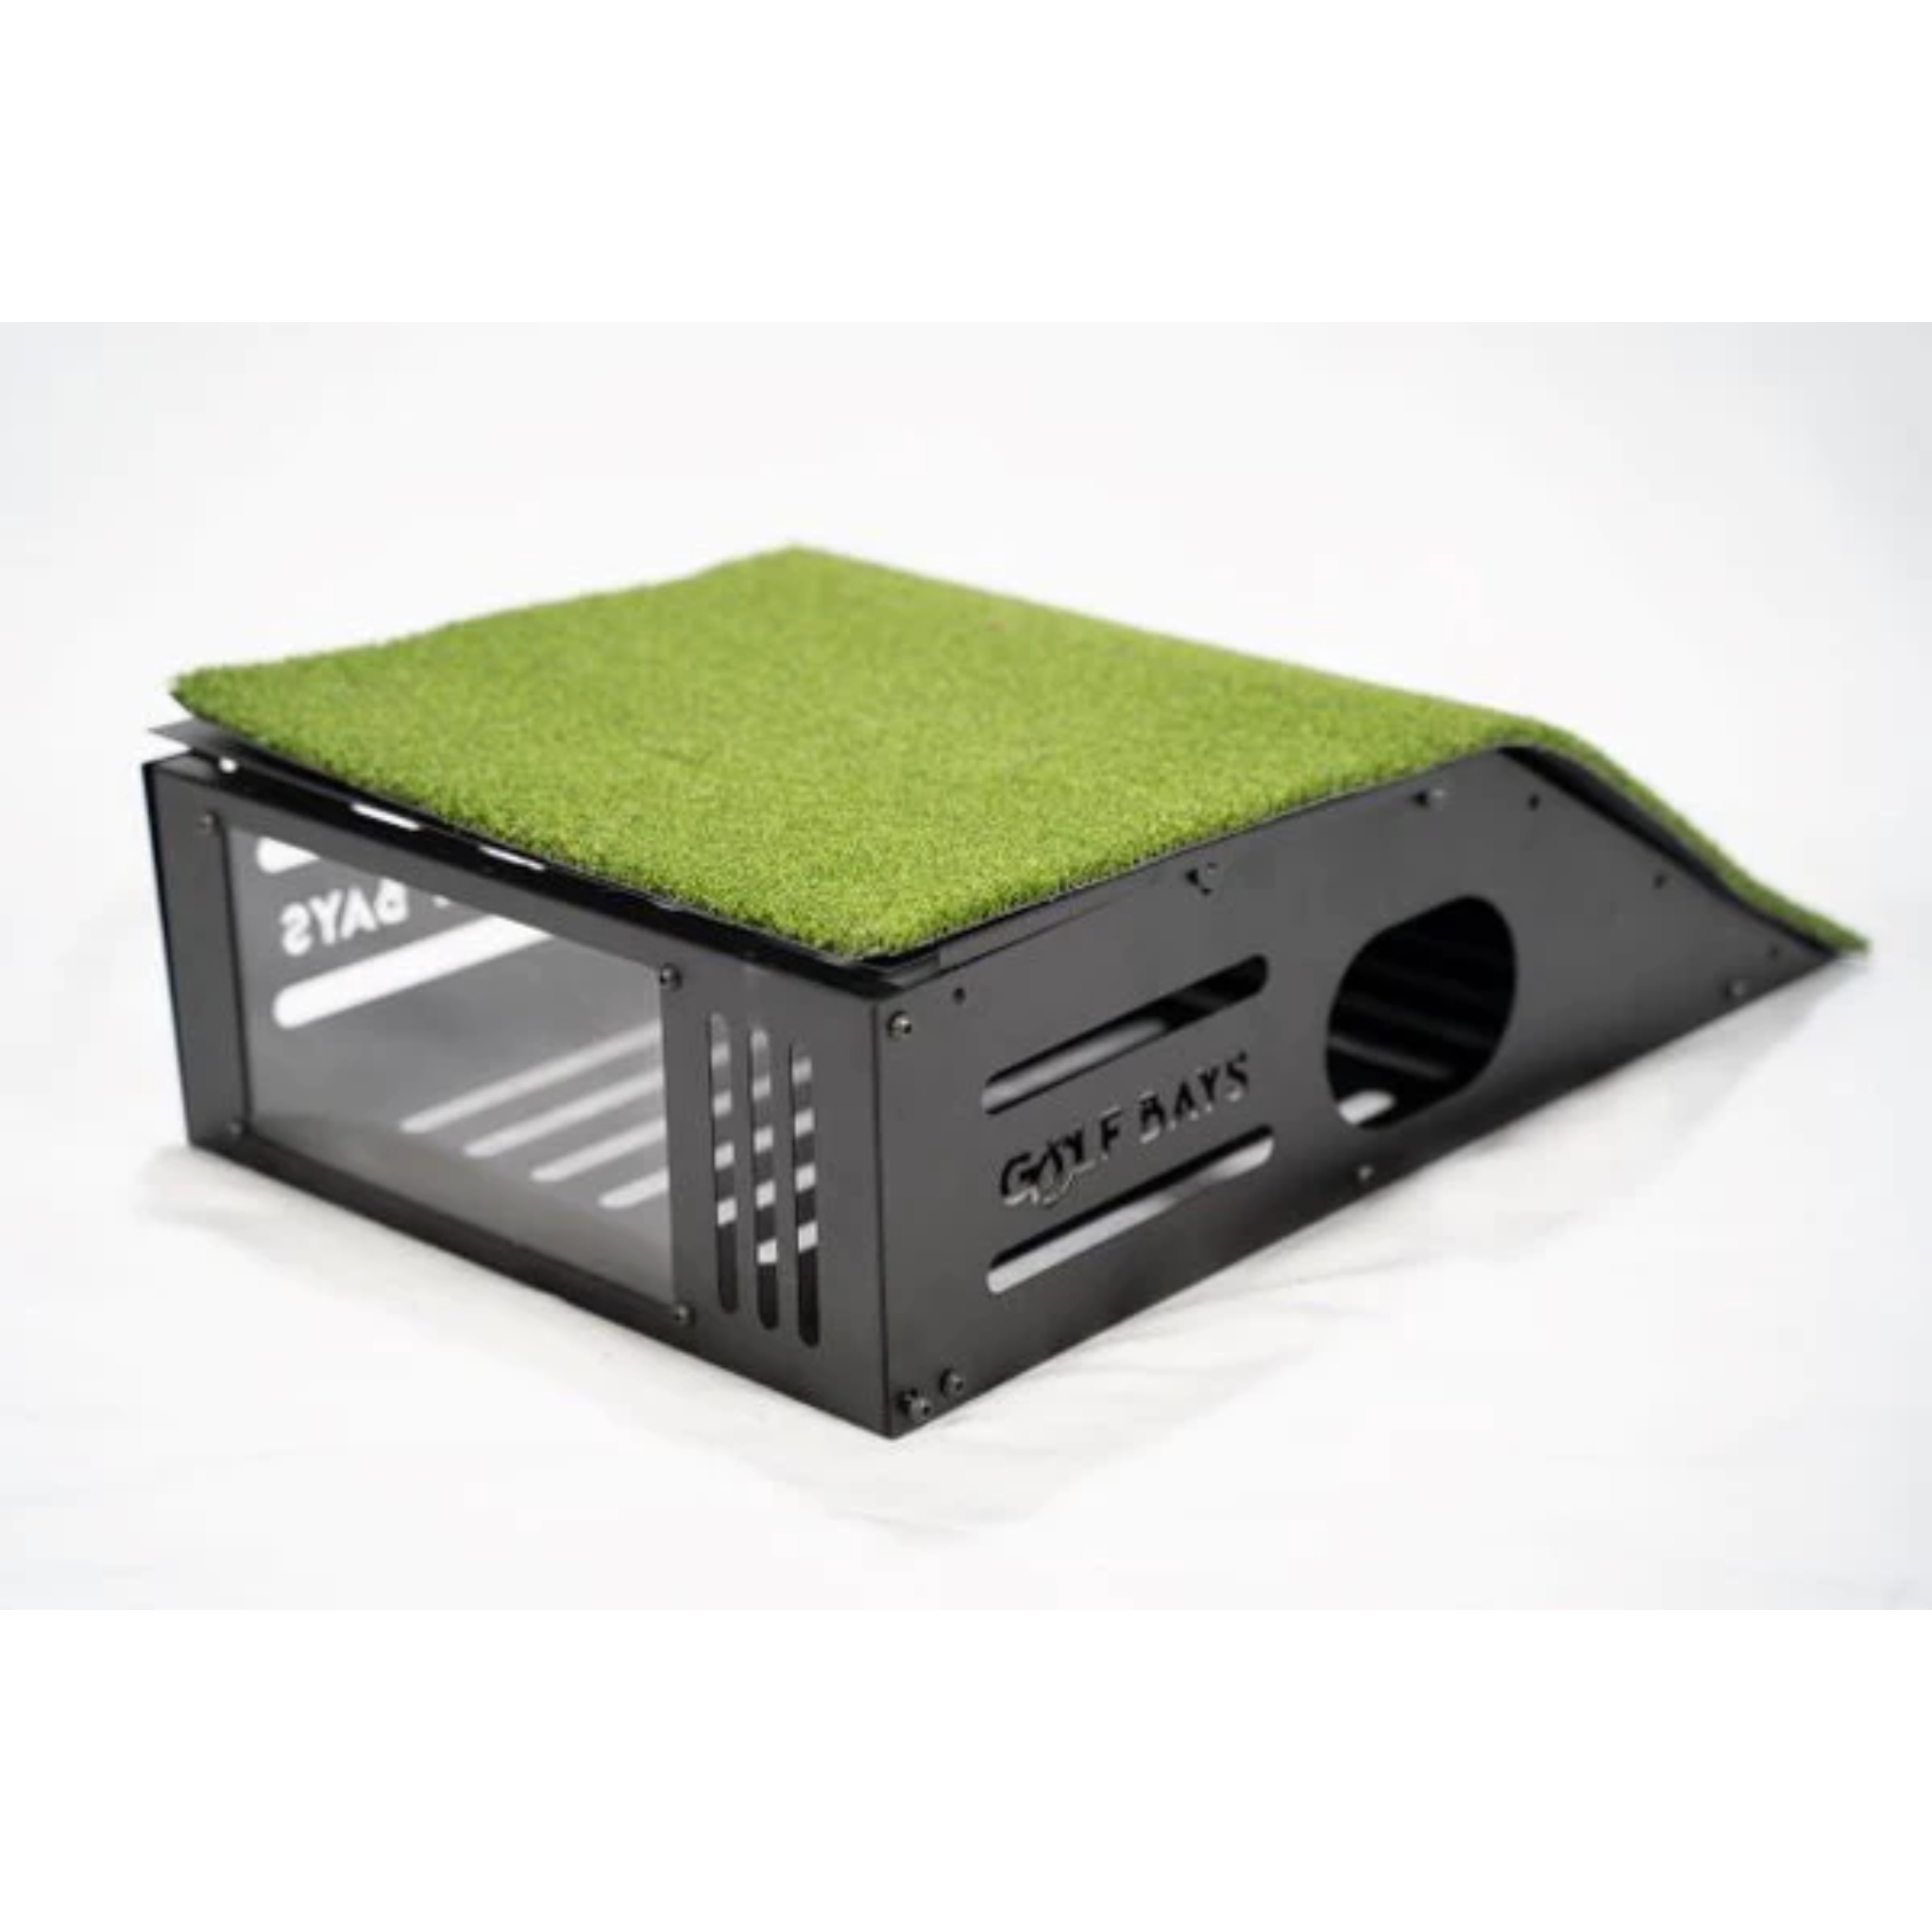 GolfBays Floor Mounted Projector Case